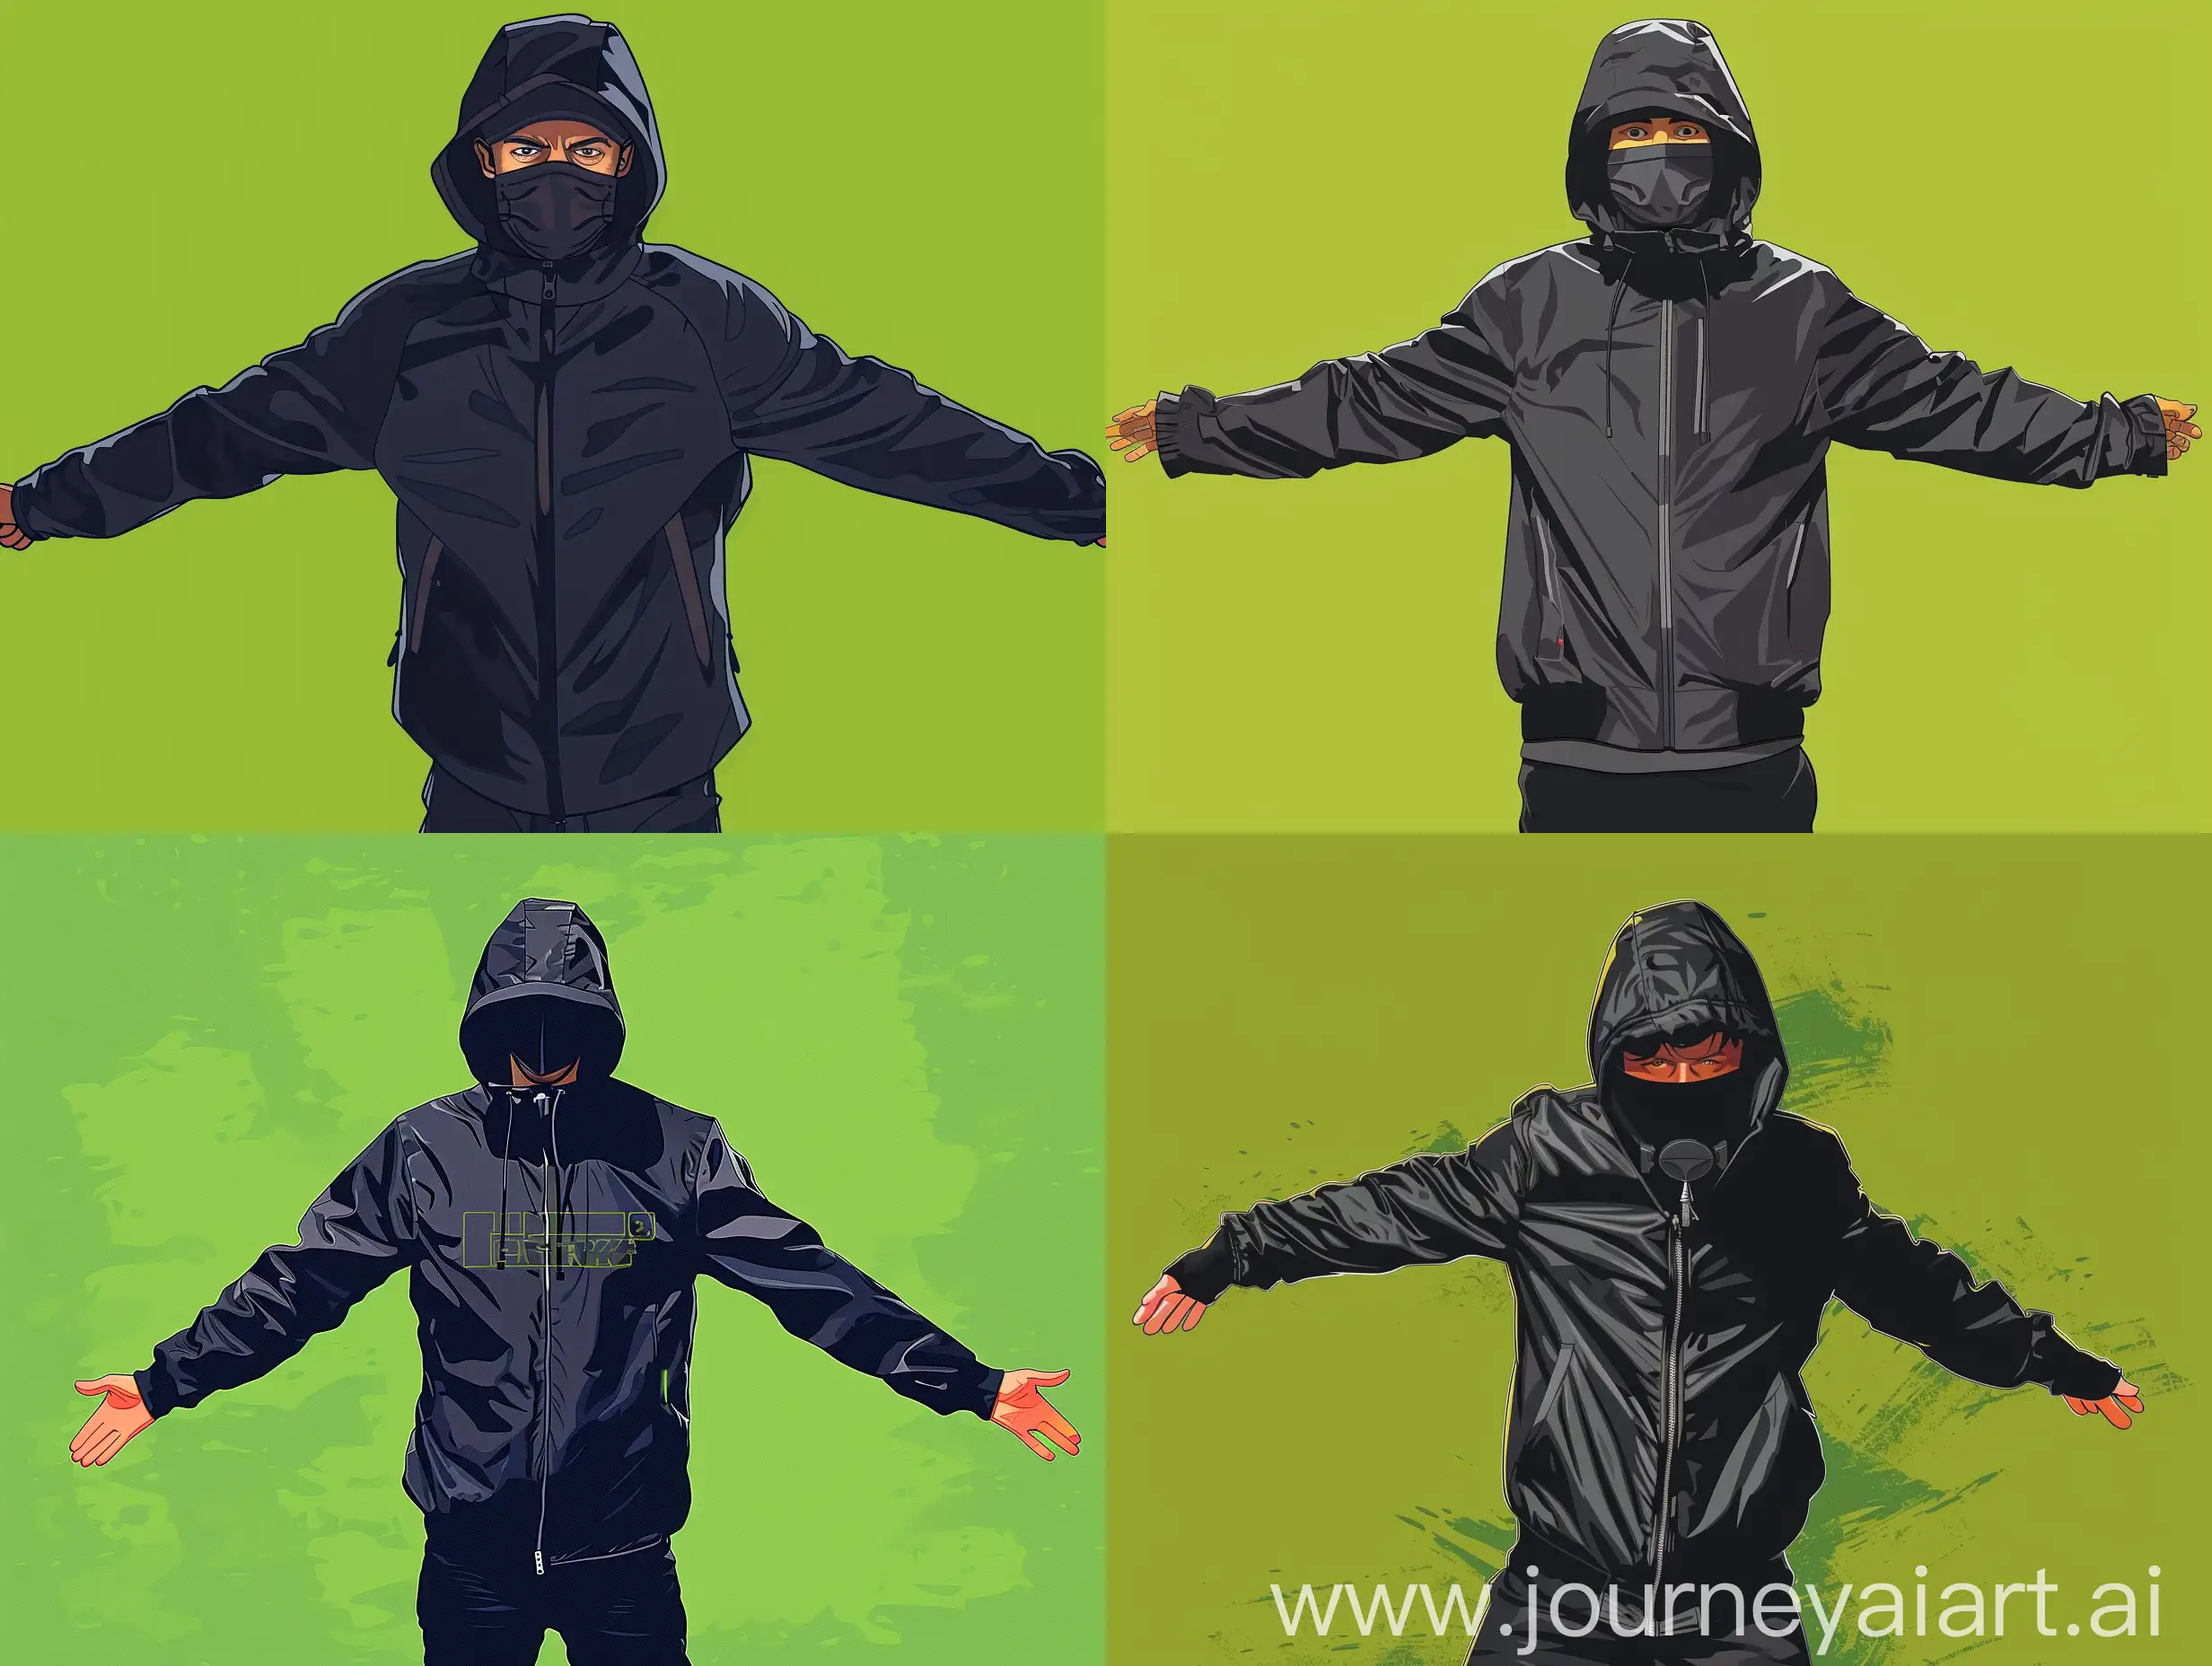 A man in his early thirty wearing a black jacket with a hood up and a mask covering his nose and mouth, on a bright green background in a full-length T pose, he looks in front, his arms are extended to the sides, all in cartoon style